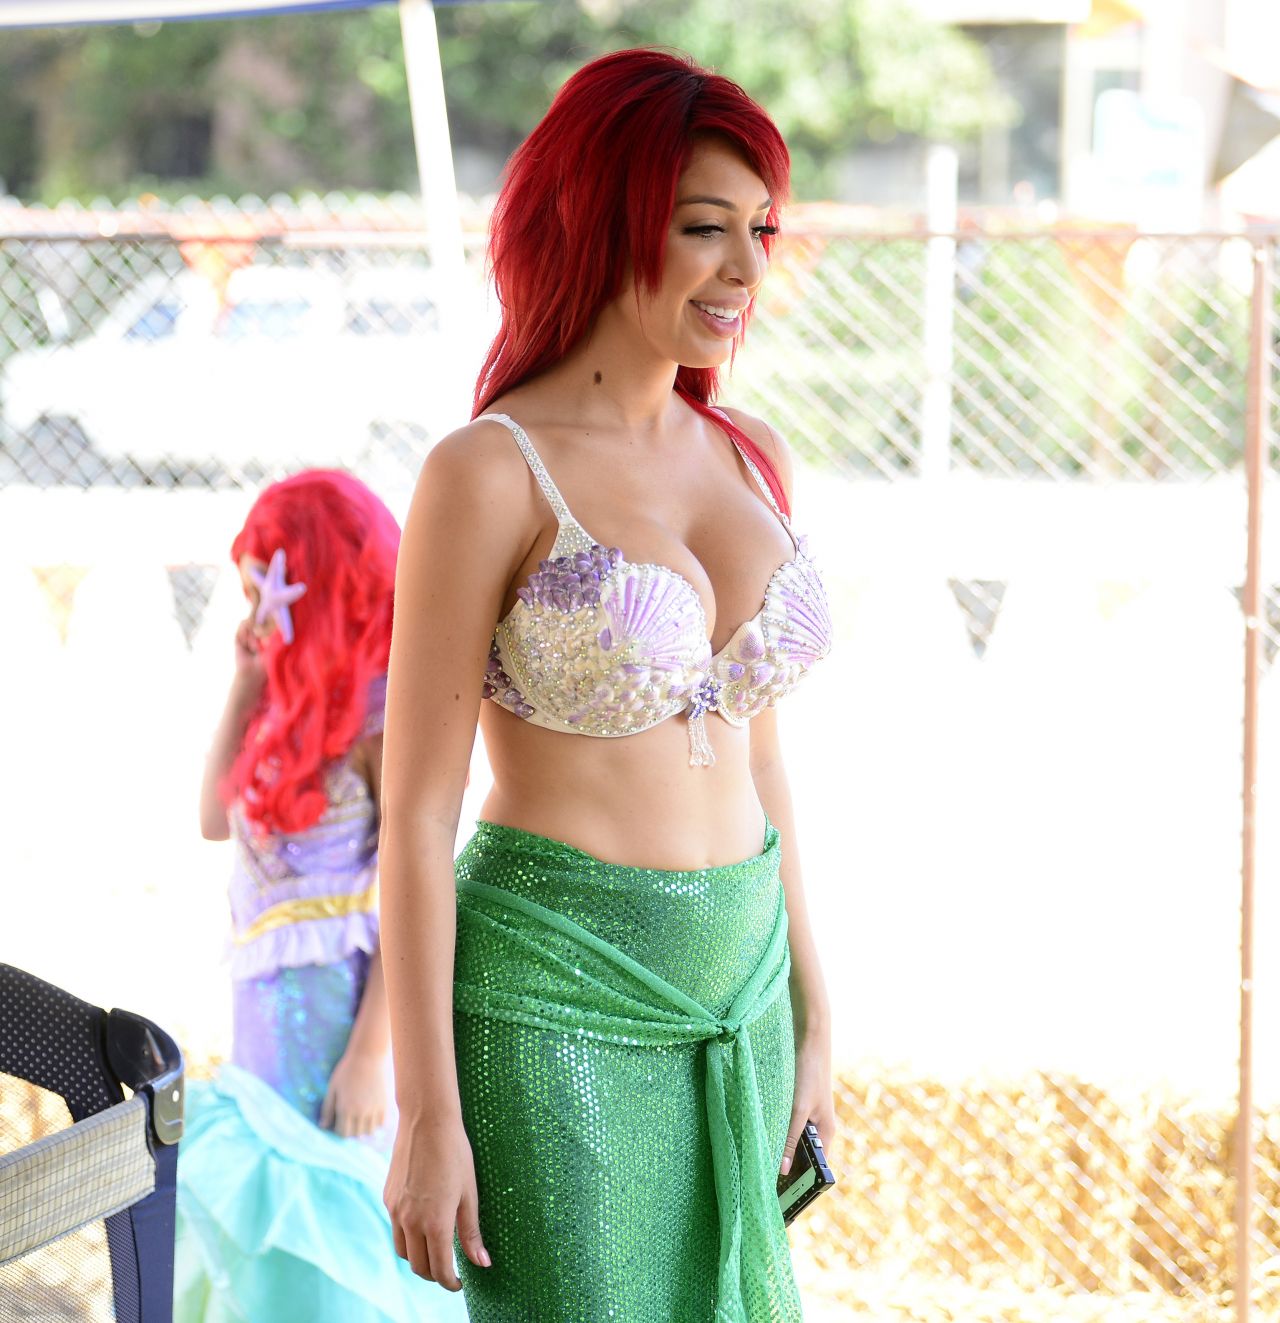 Farrah Abraham in Mermaid Costume at a Pumpkin Patch in Los Angeles 10/27/2...